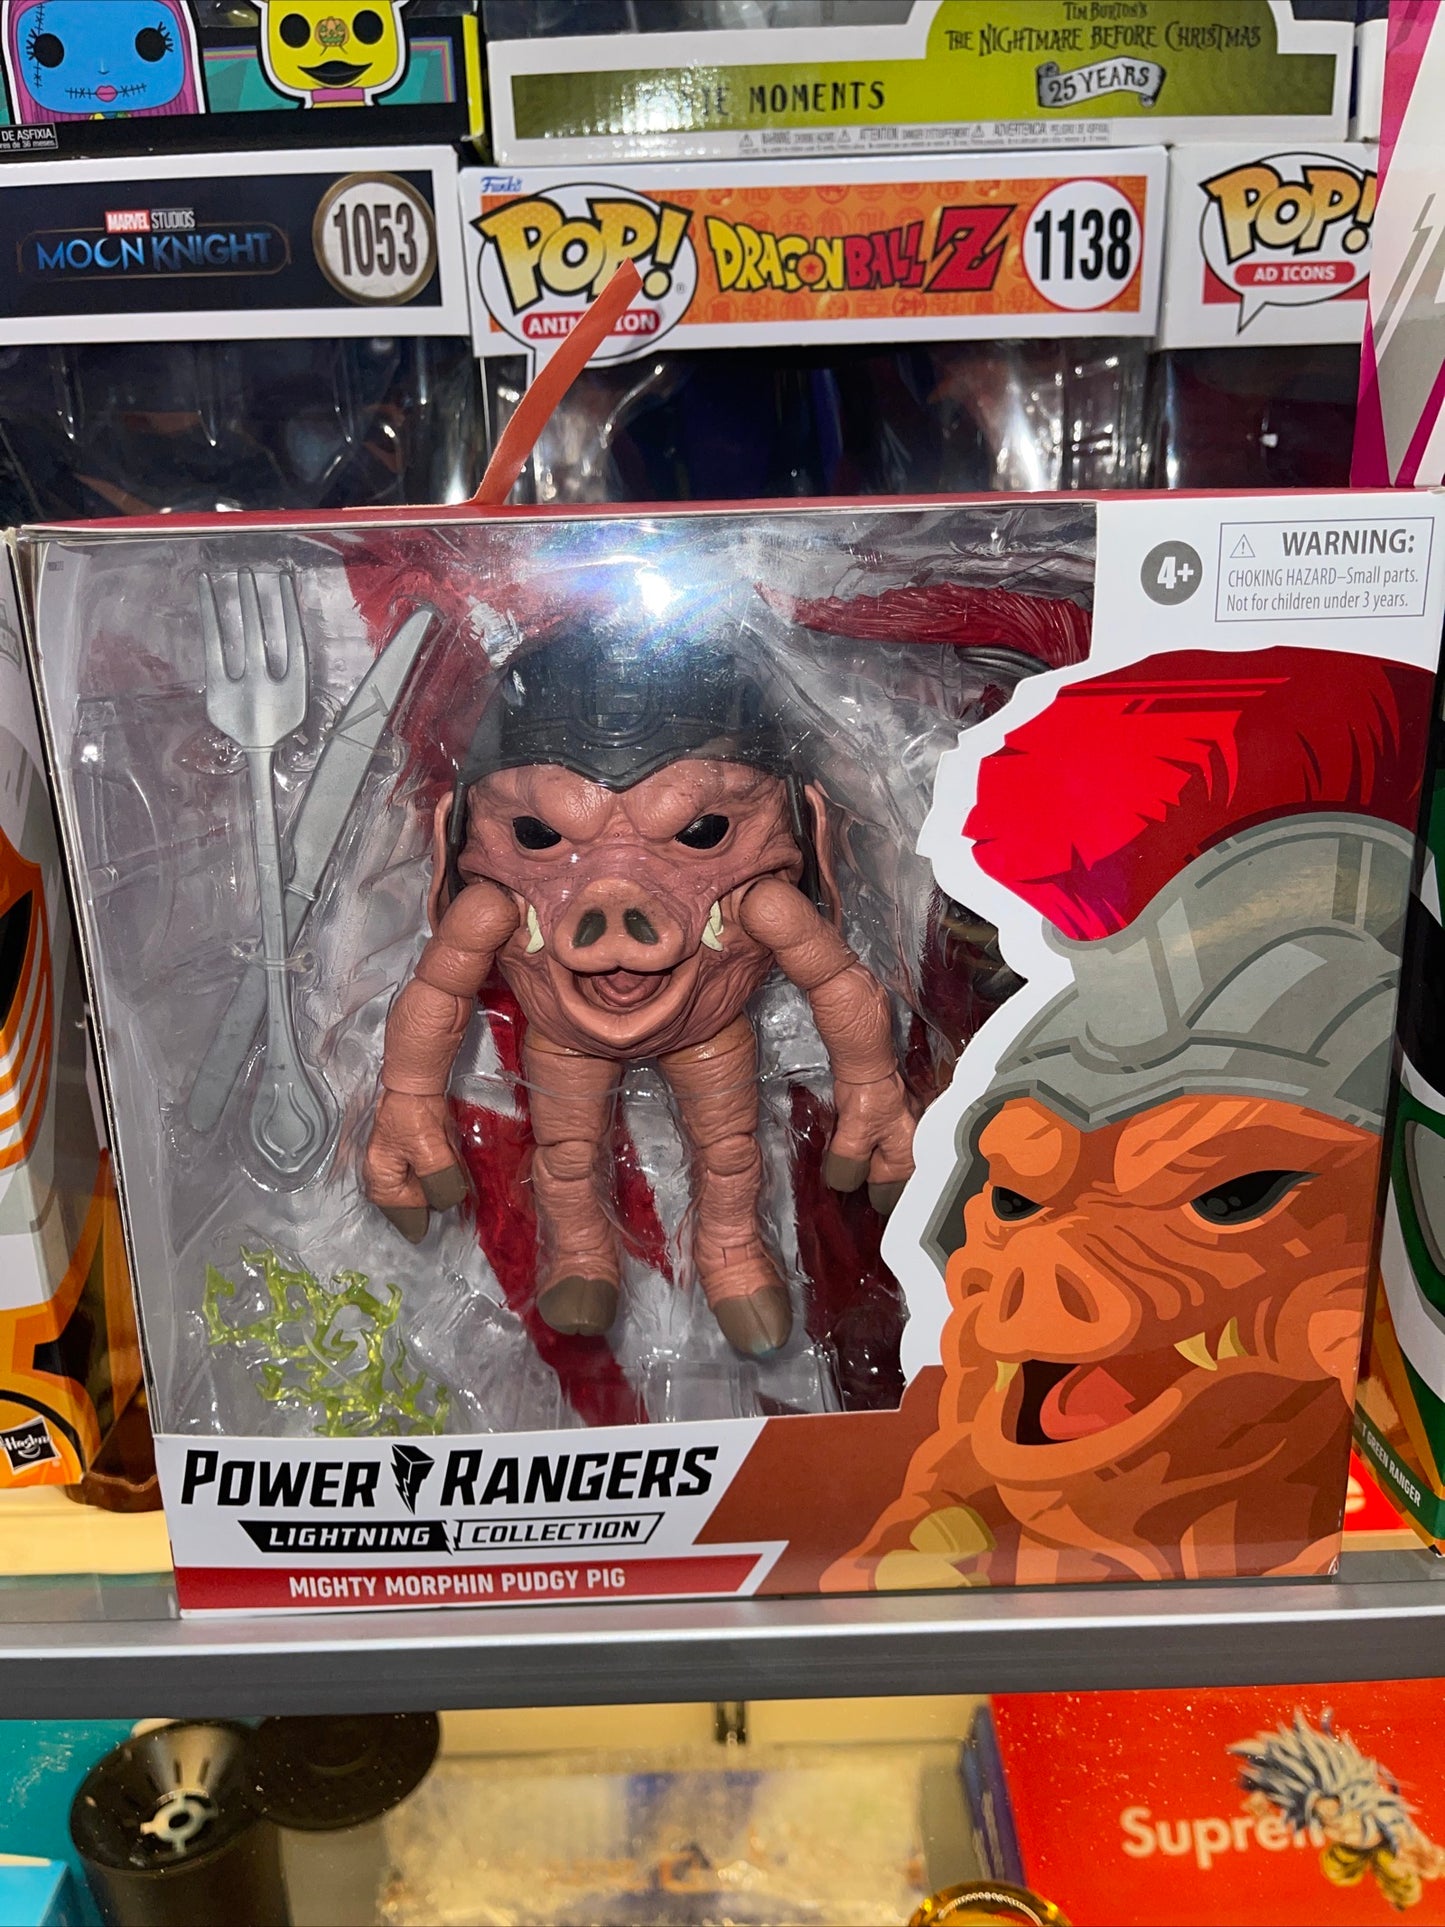 Mighty Morphin' Power Rangers Lightning Collection Action Figure "Pudgy Pig"